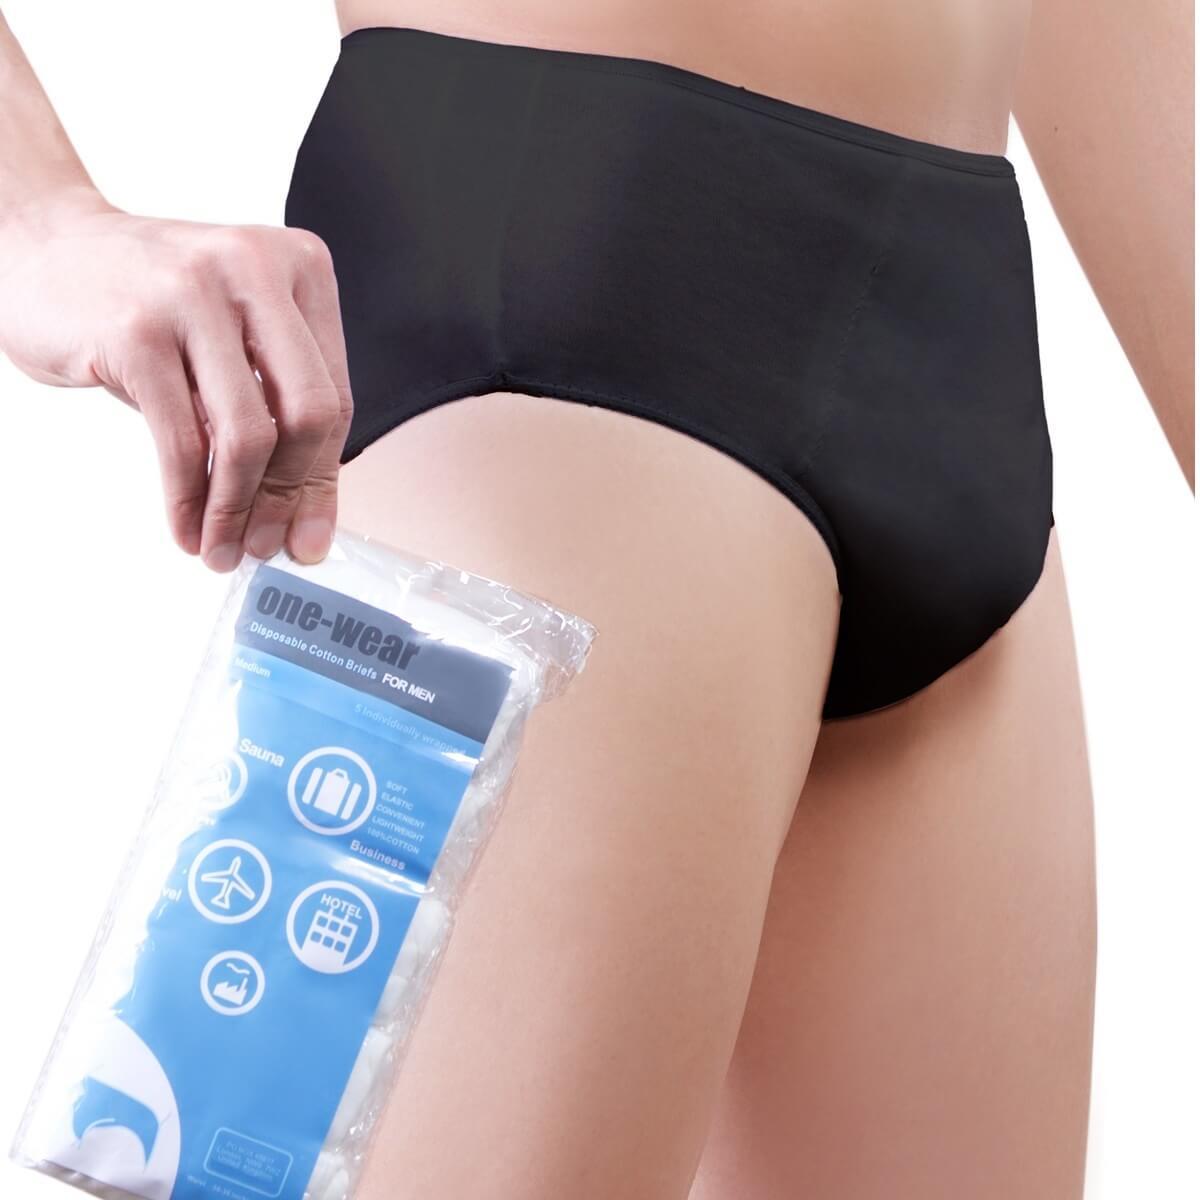 https://owtravelproducts.com/cdn/shop/products/One-Wear_Disposable_Briefs_Pants_Underpants_for_Hospital_Travel_Spa_and_Emergency_-_Cotton_Black_-_Flexible_Fit_Disposable_Cotton_Underwear.jpg?v=1652458664&width=1445